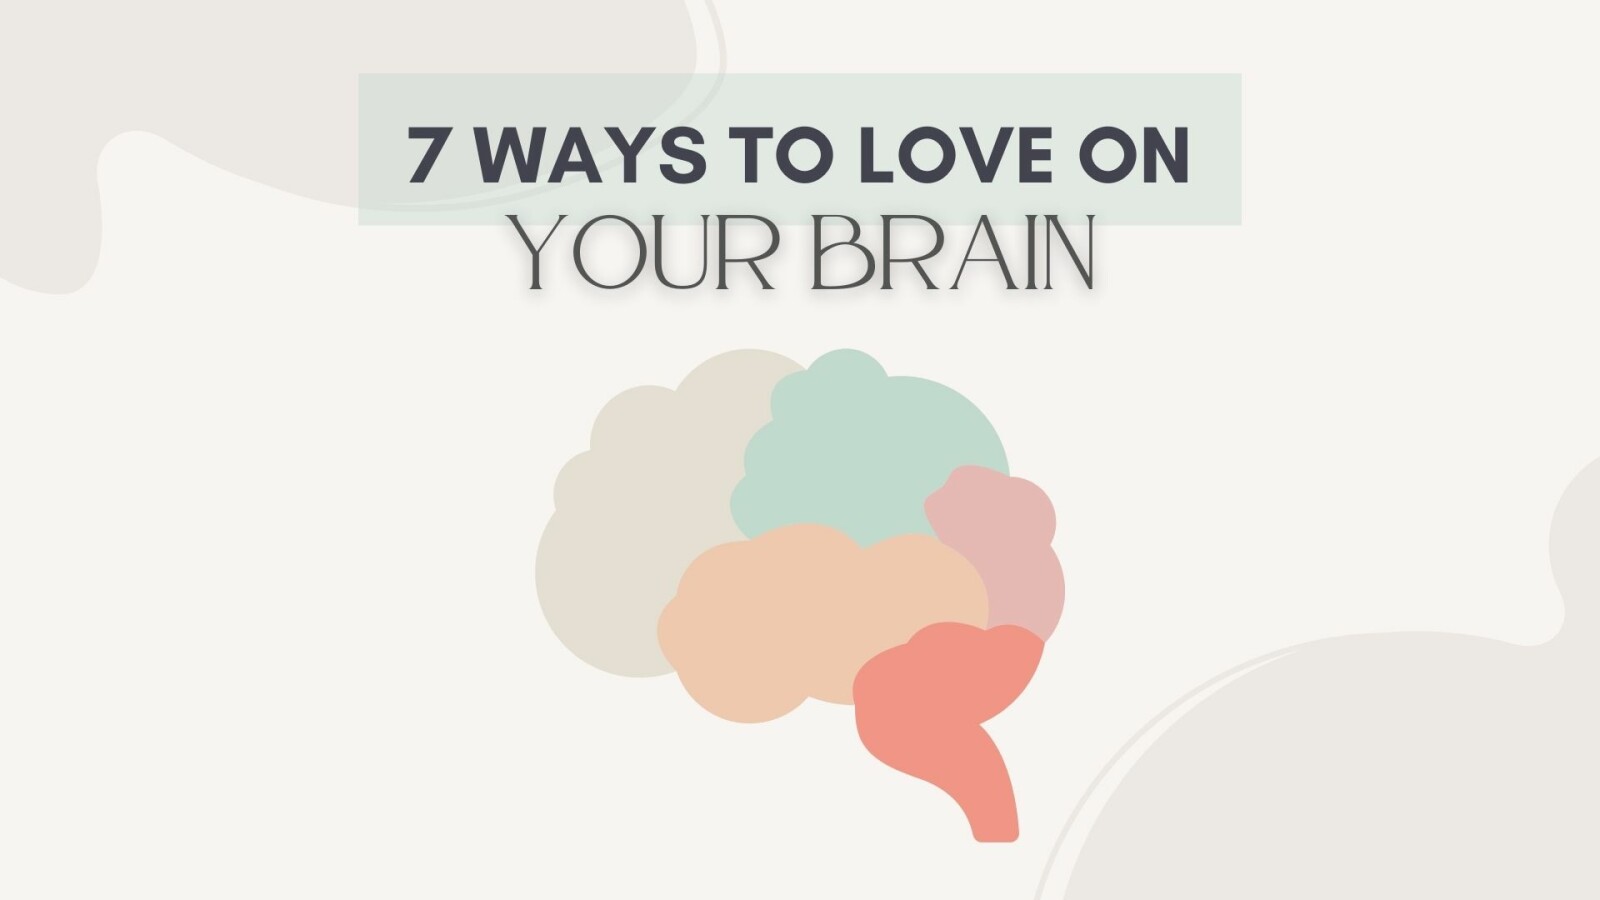 7 Ways to Love on Your Brain